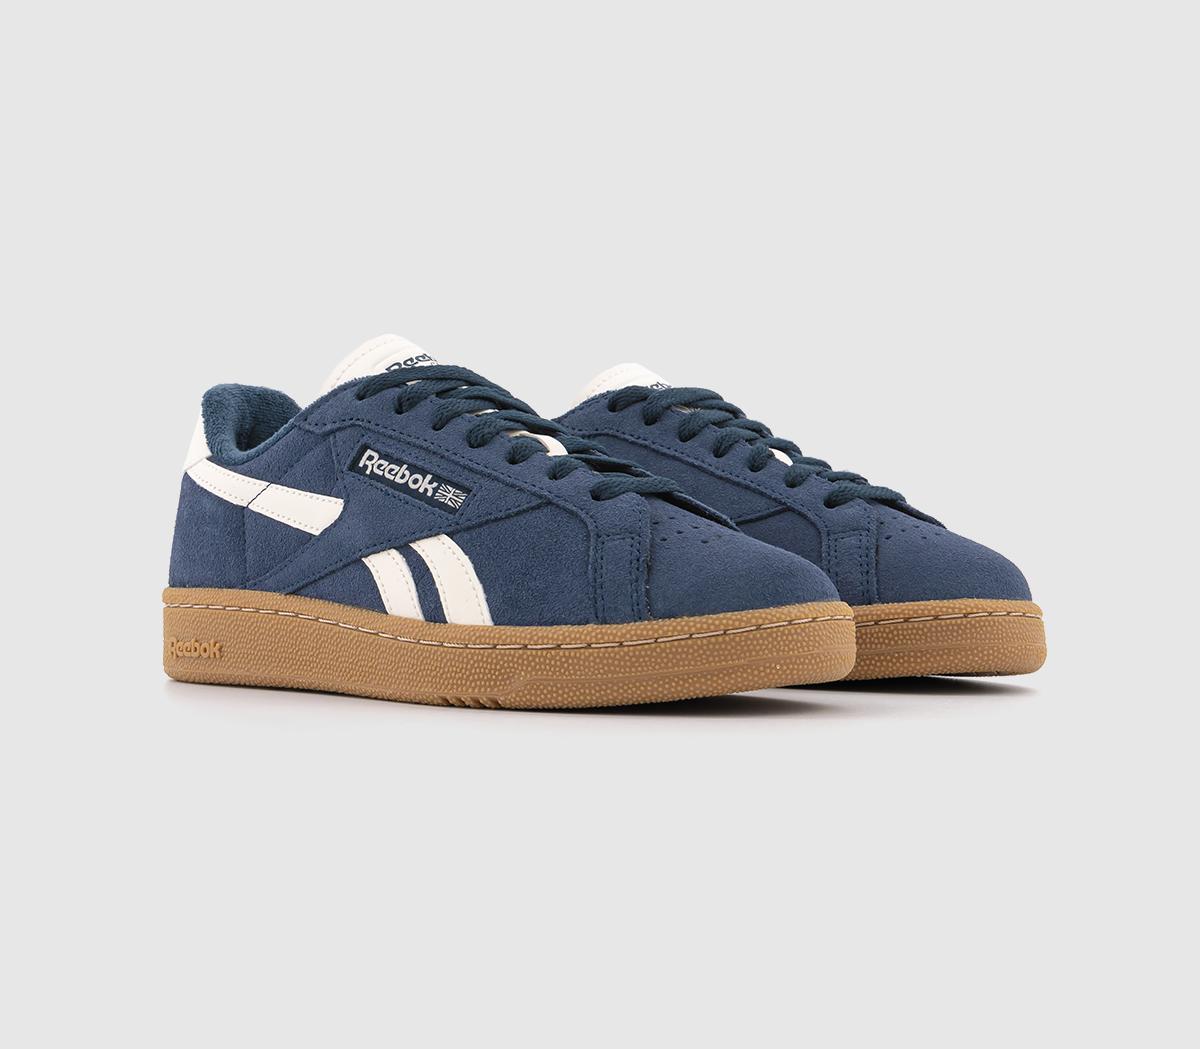 Reebok Womens Club C Grounds Trainers Vector Navy Blue, 7